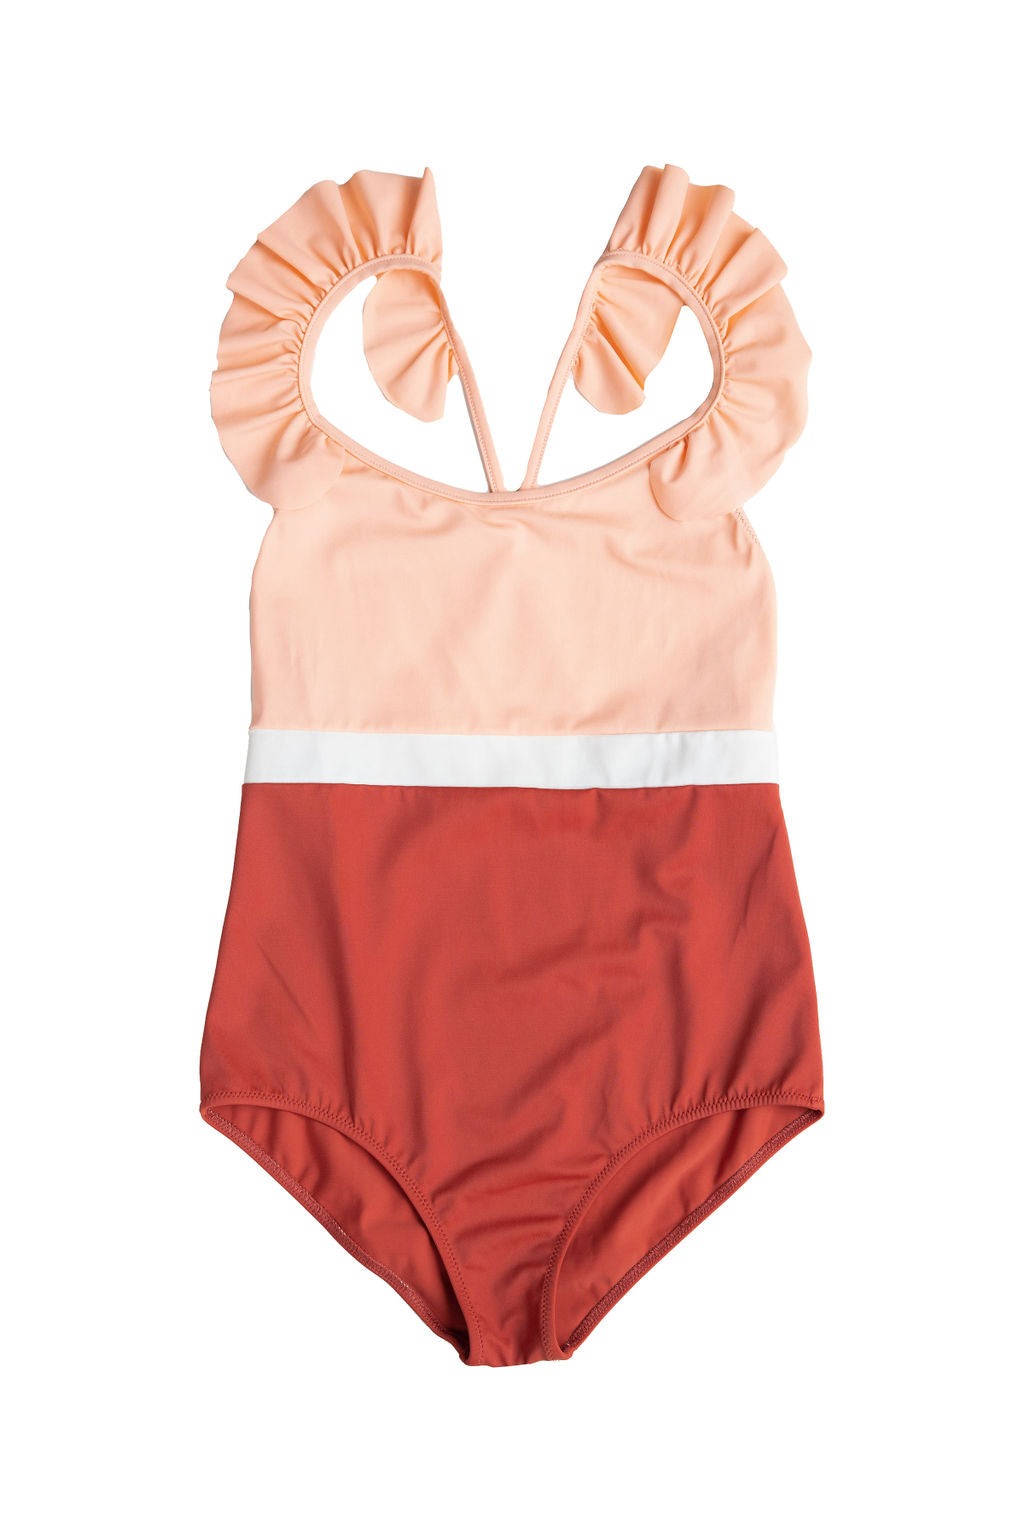 Coco One Piece Swimsuit Terracotta and Peachpink